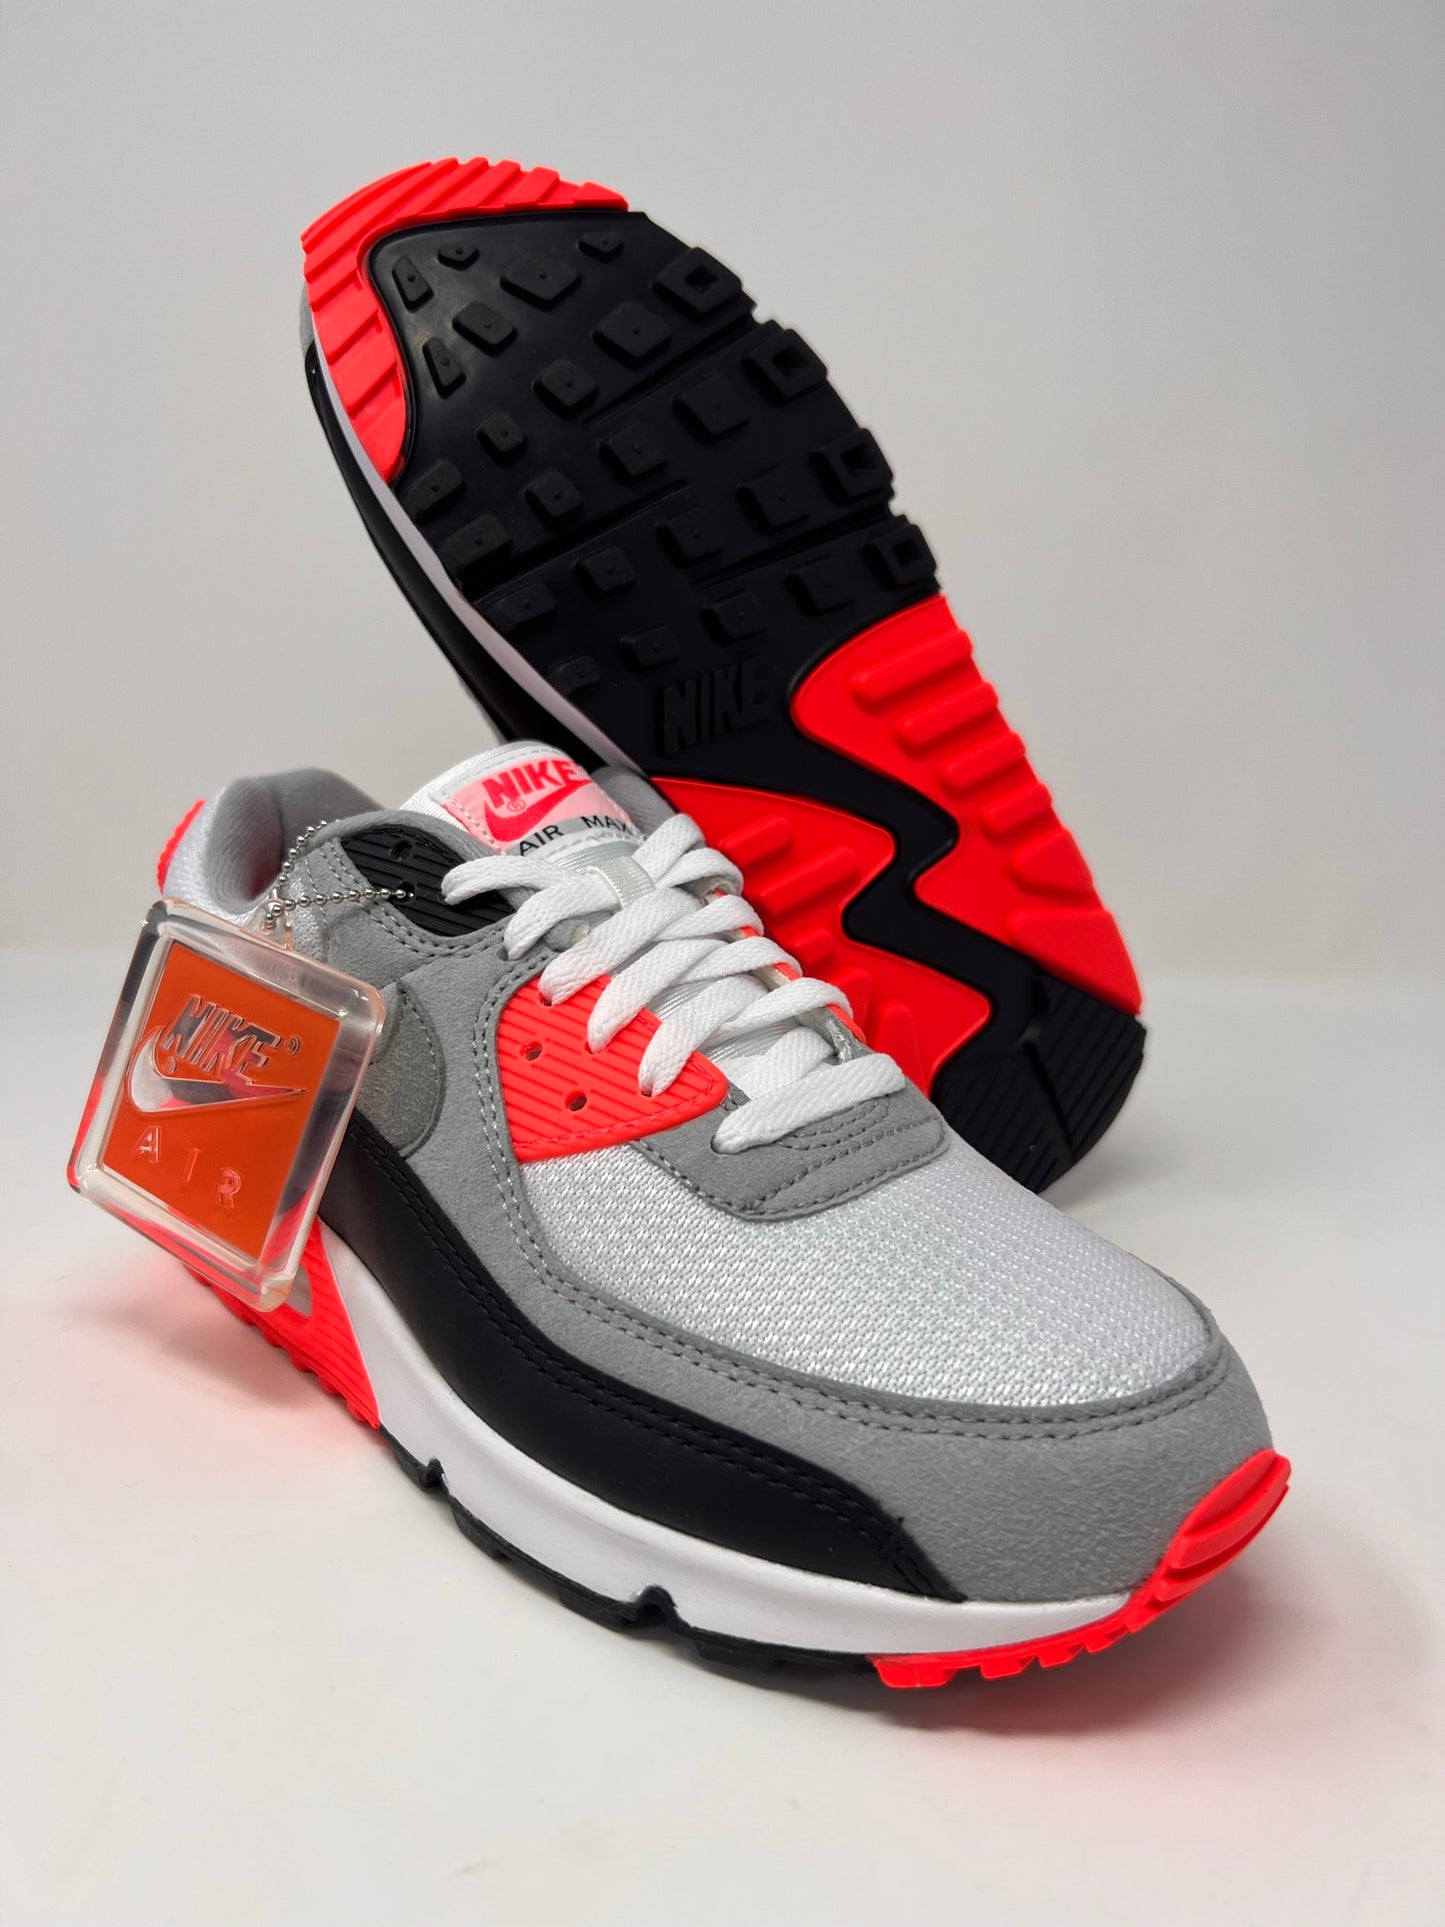 Nike Air Max 90 Infrared 2020 UK7 DS